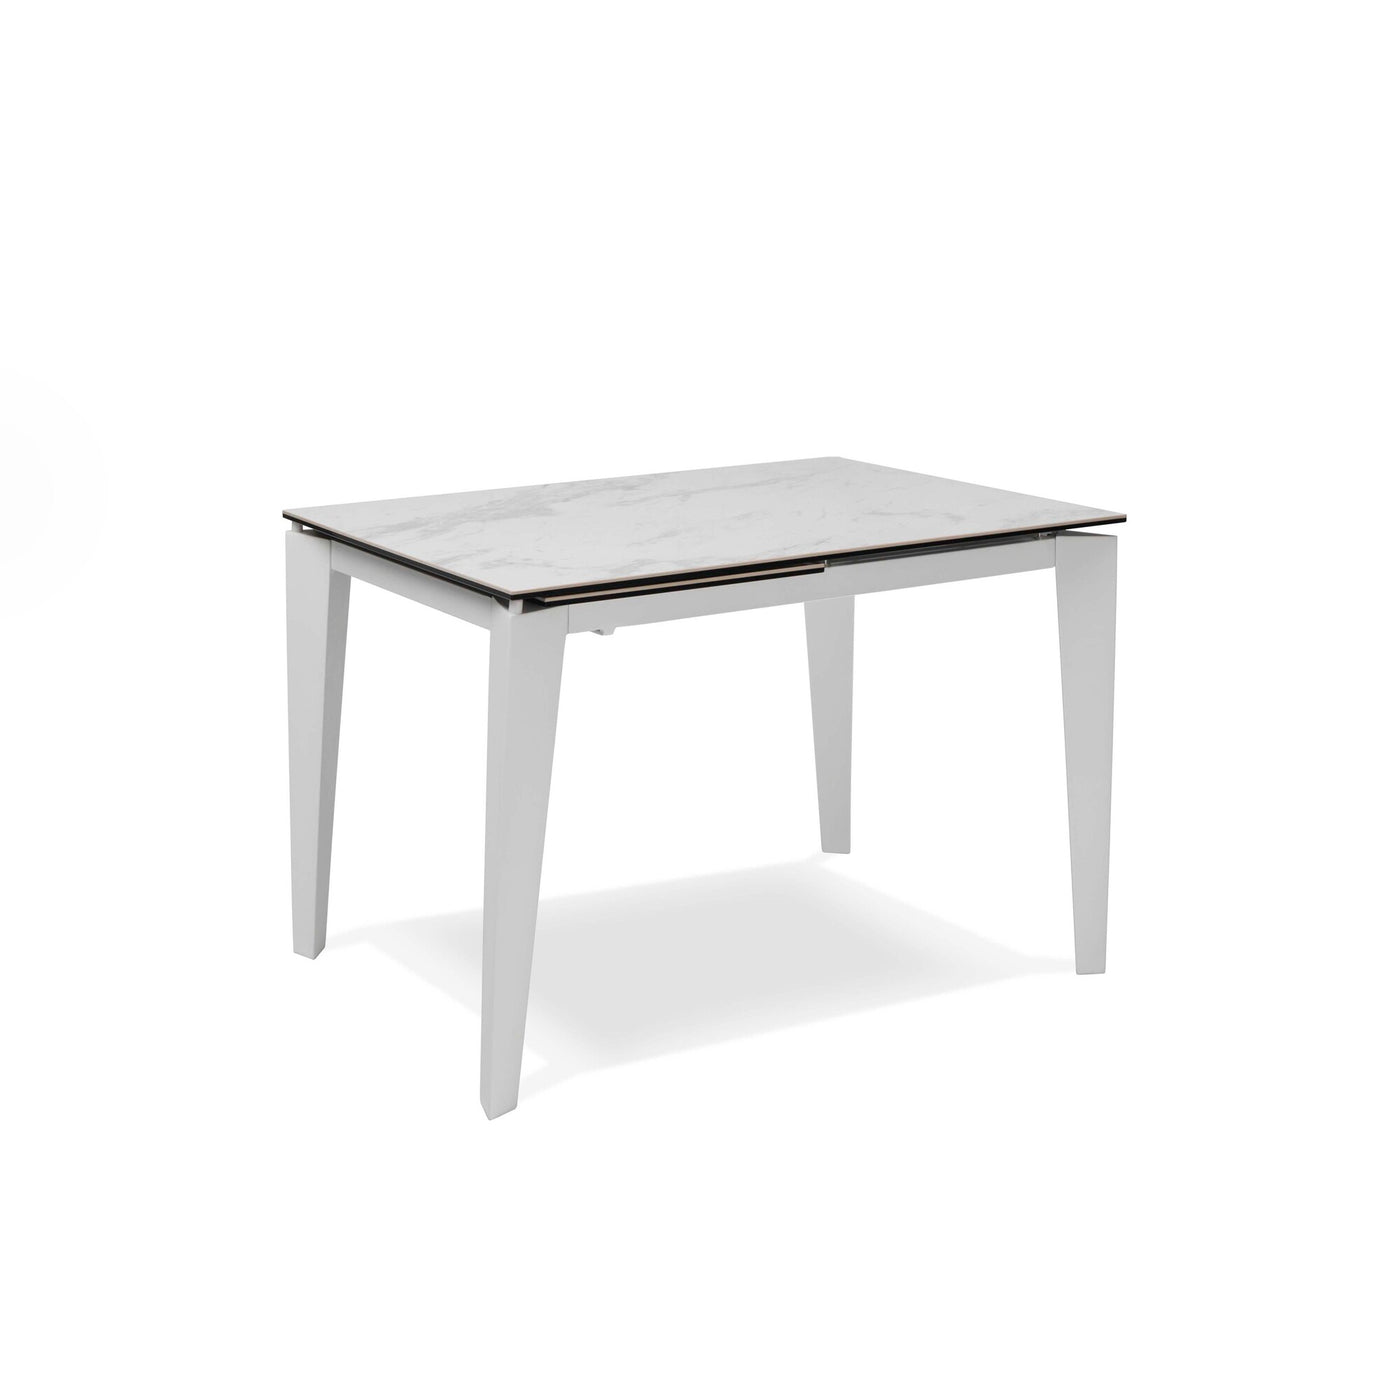 PUAKO extendable table in white marble